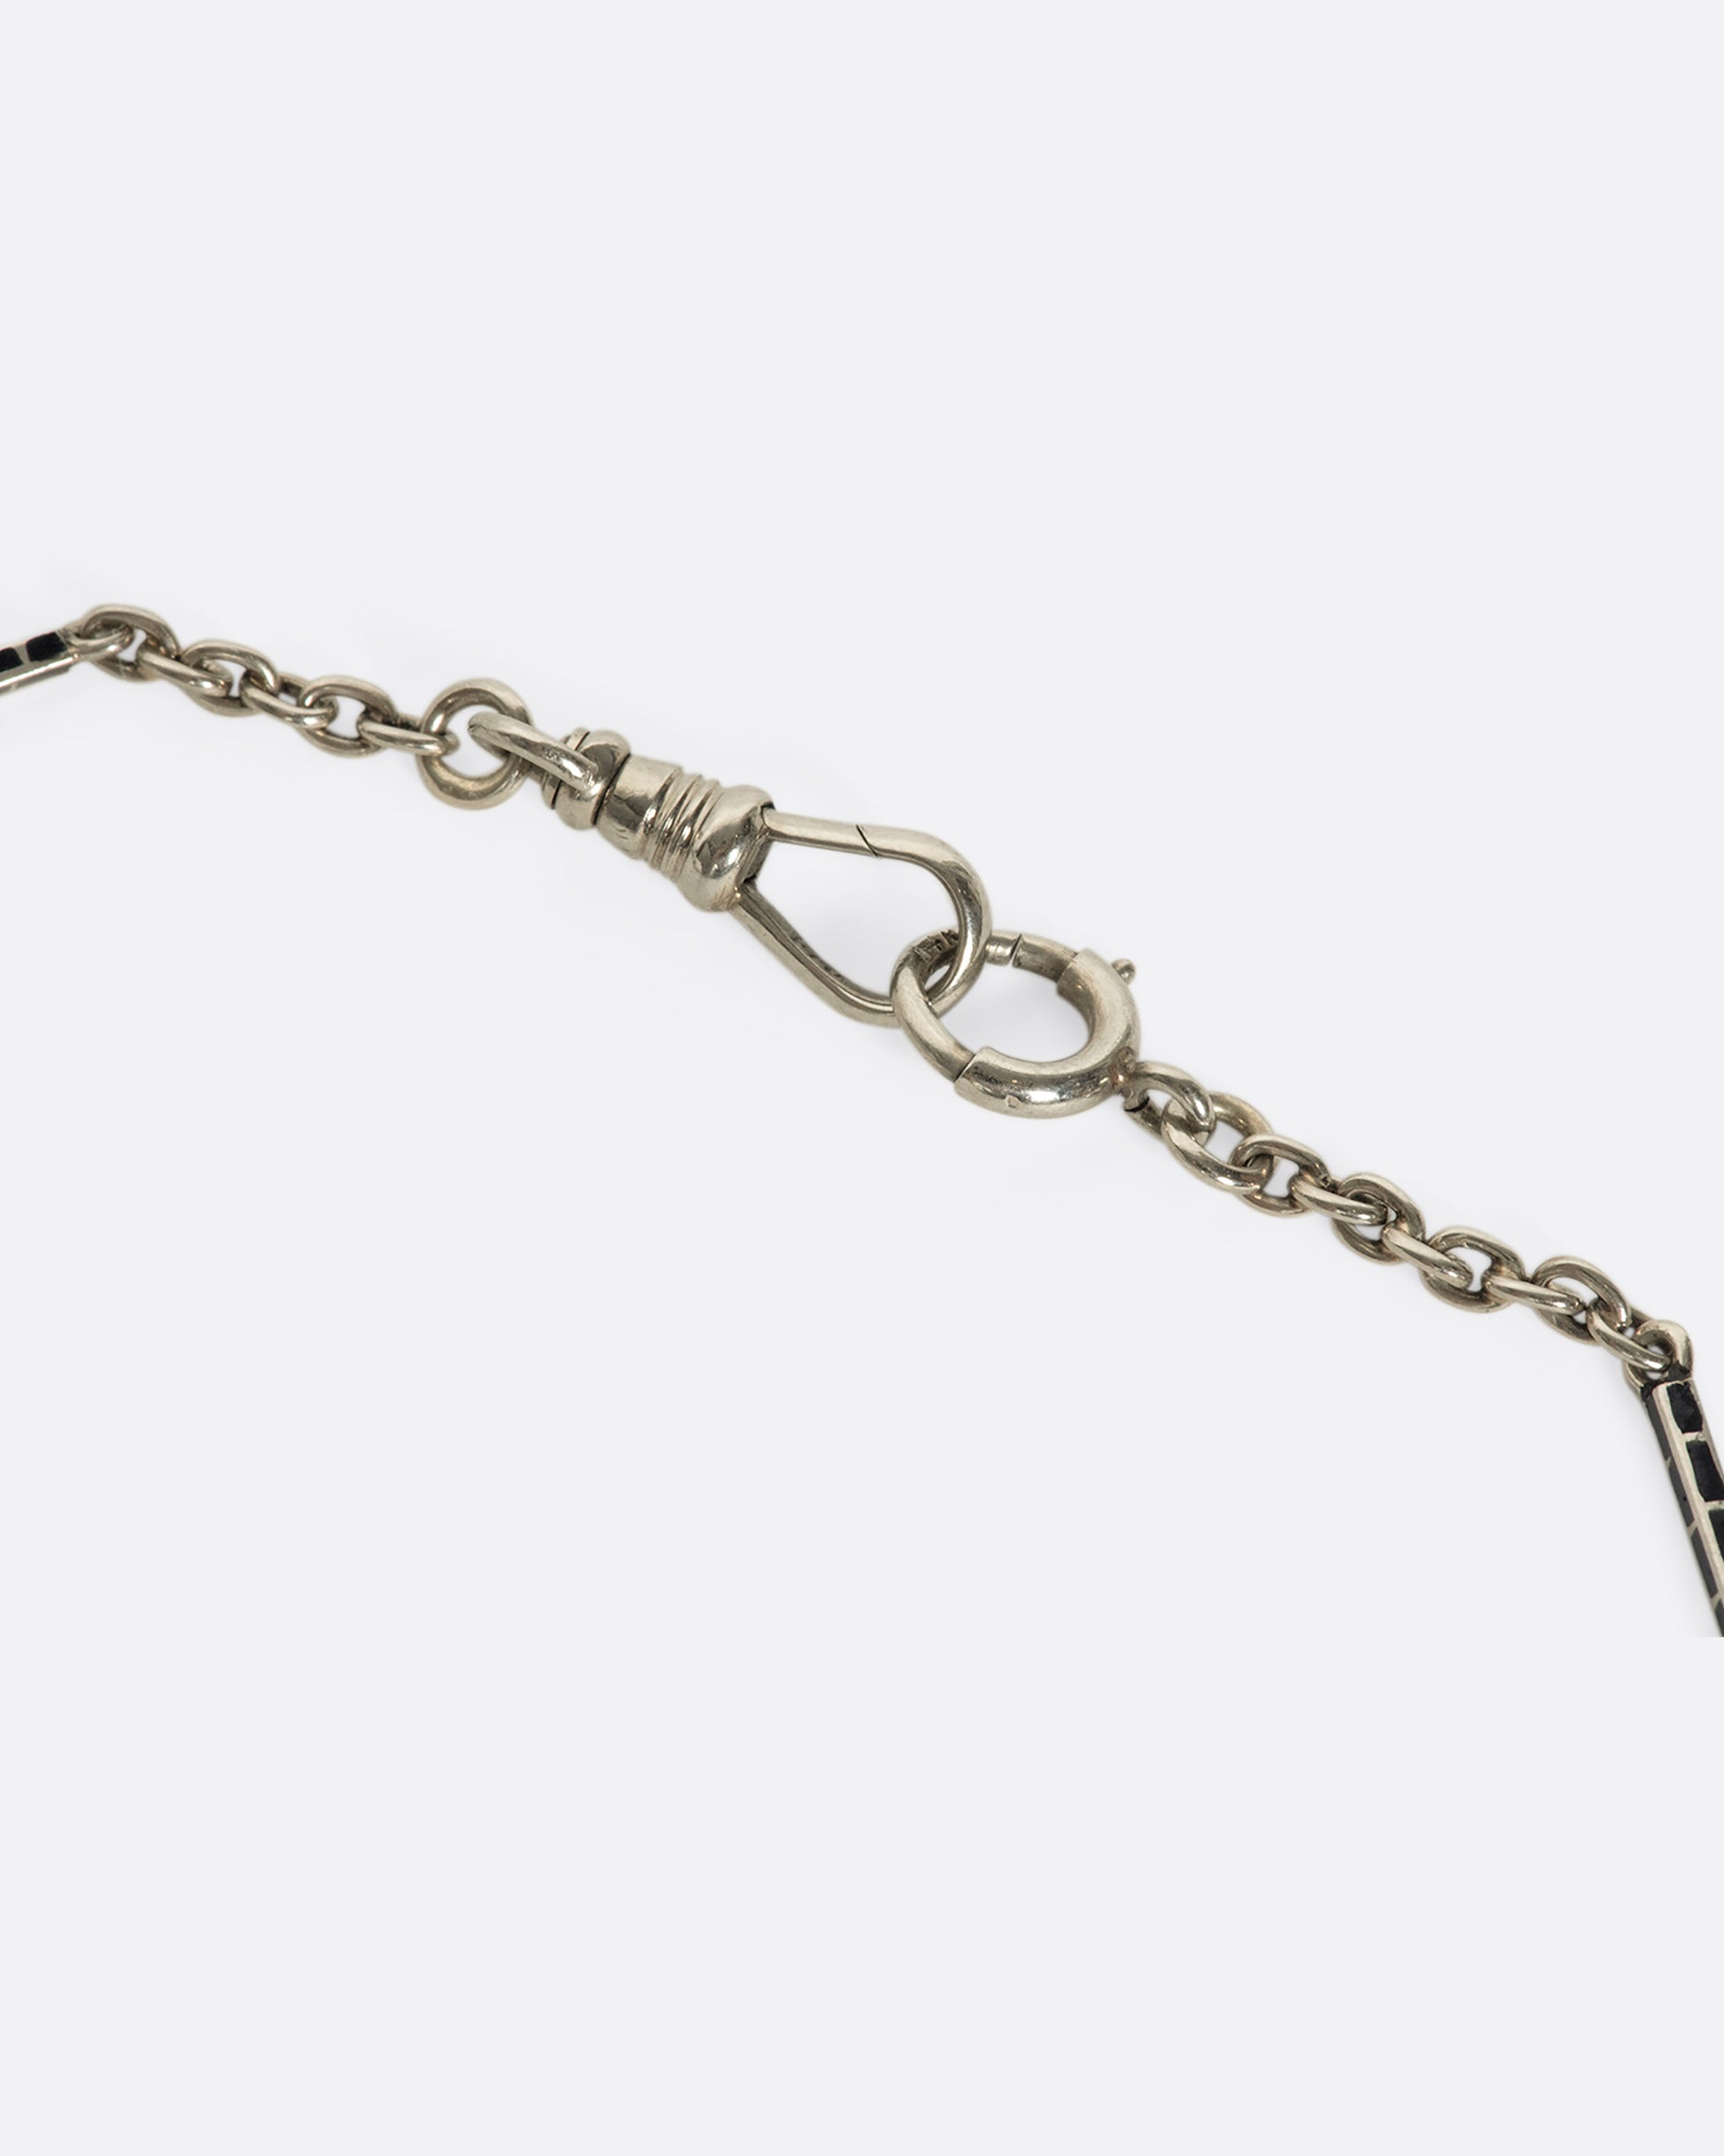 A vintage 14K white gold bar-link chain necklace with black enamel alternating throughout. Measuring just under 14 inches, this a dainty choker for someone with a slender neck.